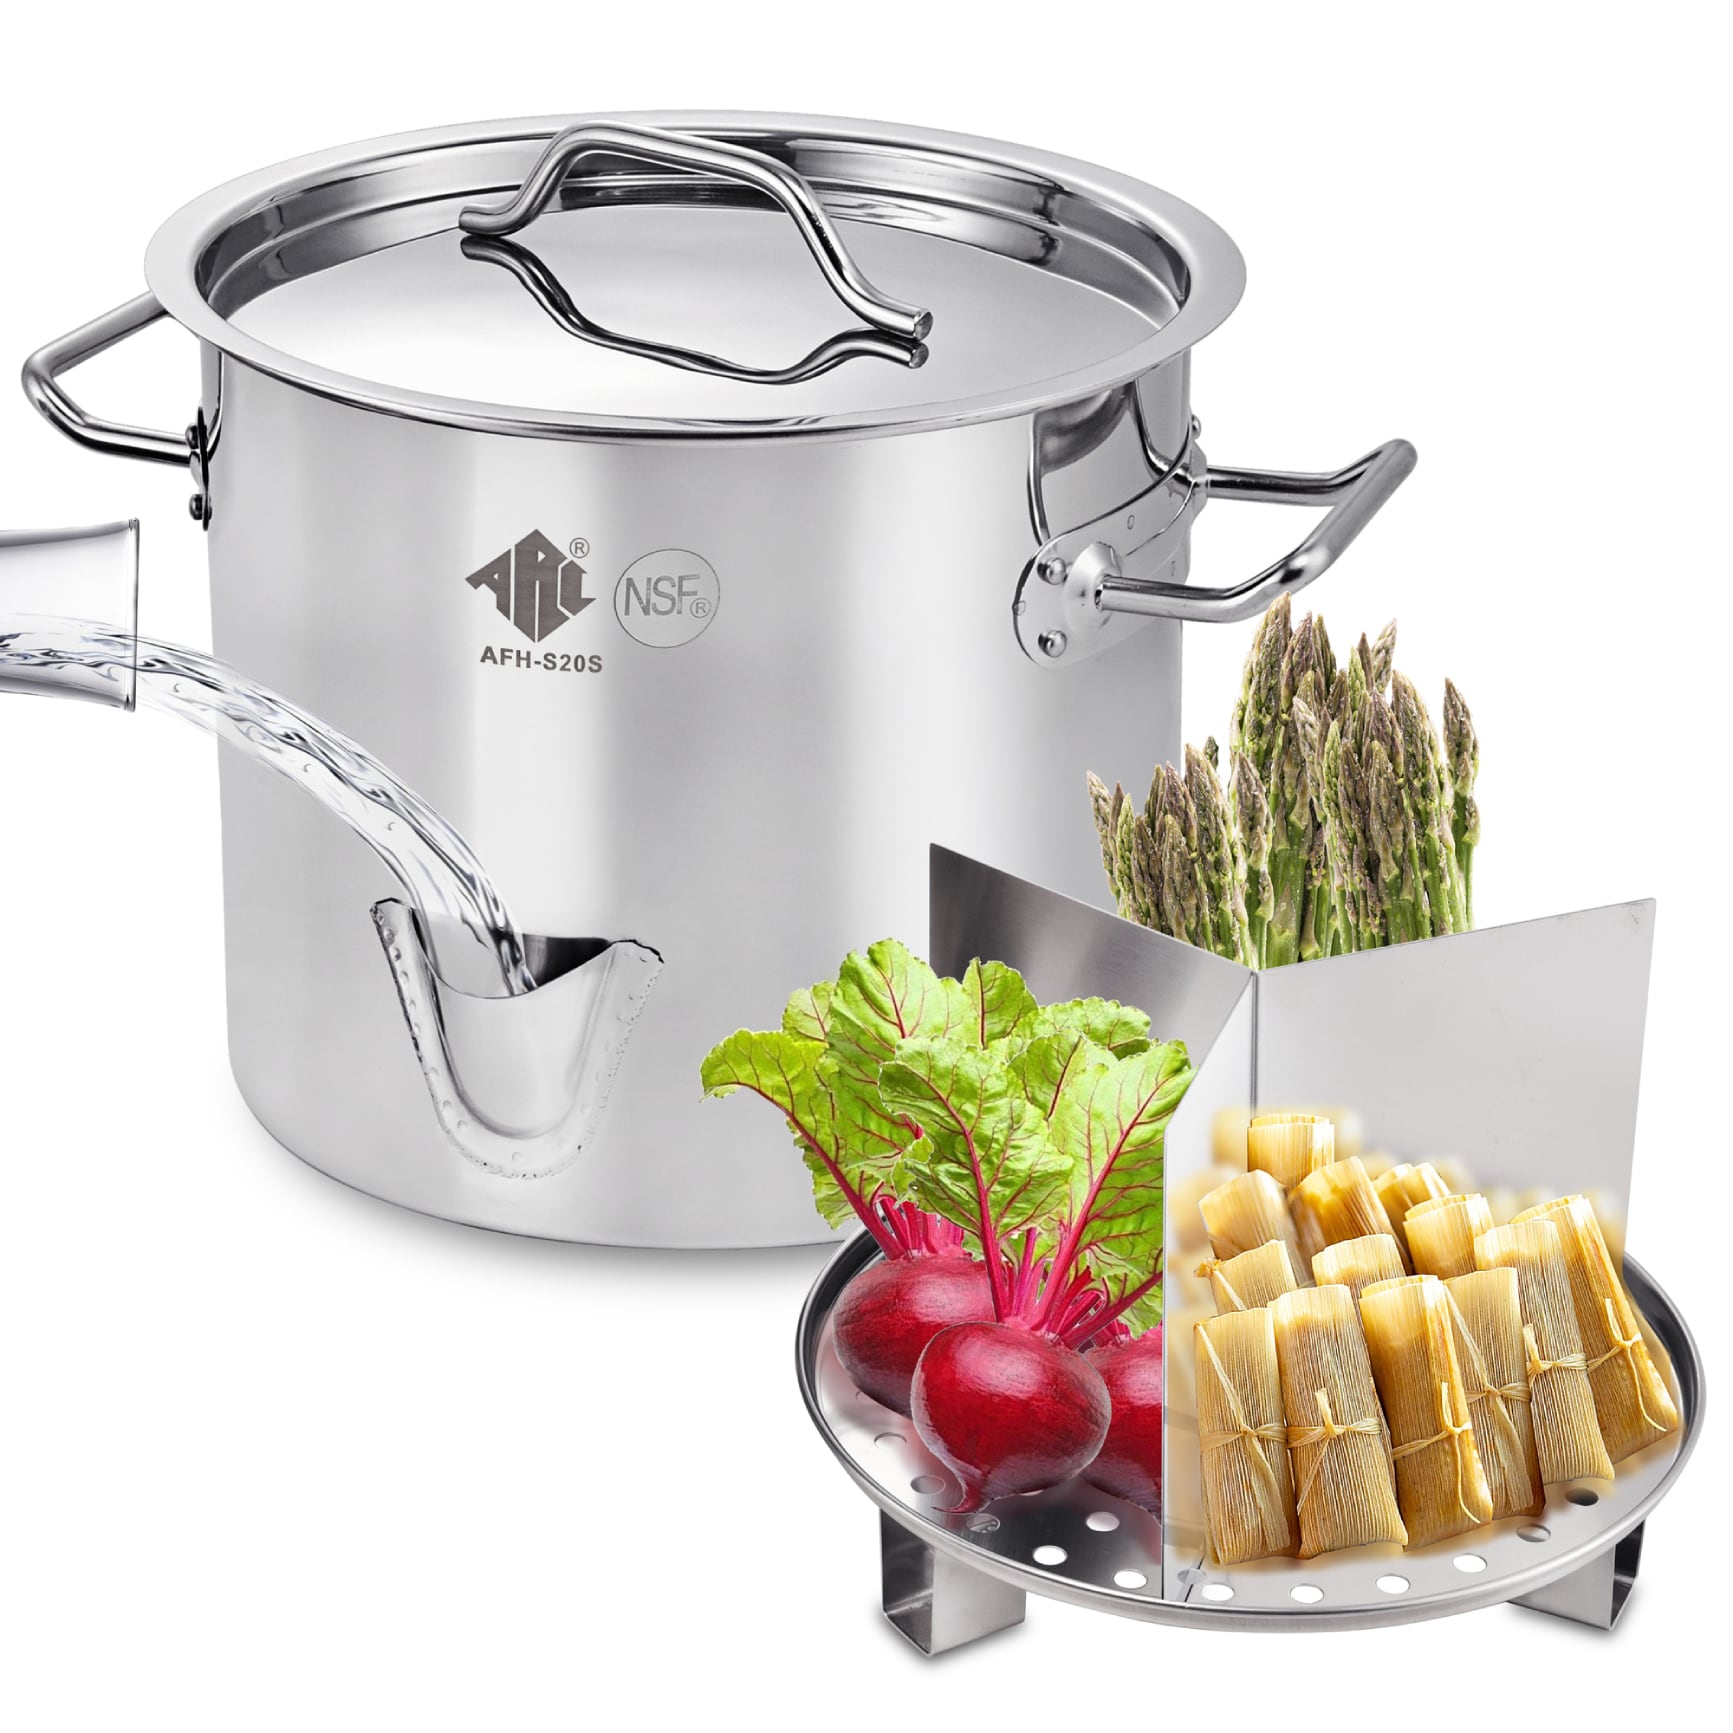  Steamer for Cooking, 18/8 Stainless Steel Steamer Pot, Food  Steamer 11 inch Steam Pots with Lid 2-tier for Cooking Vegetables, Seafood,  Soups, Stews and Pasta: Home & Kitchen